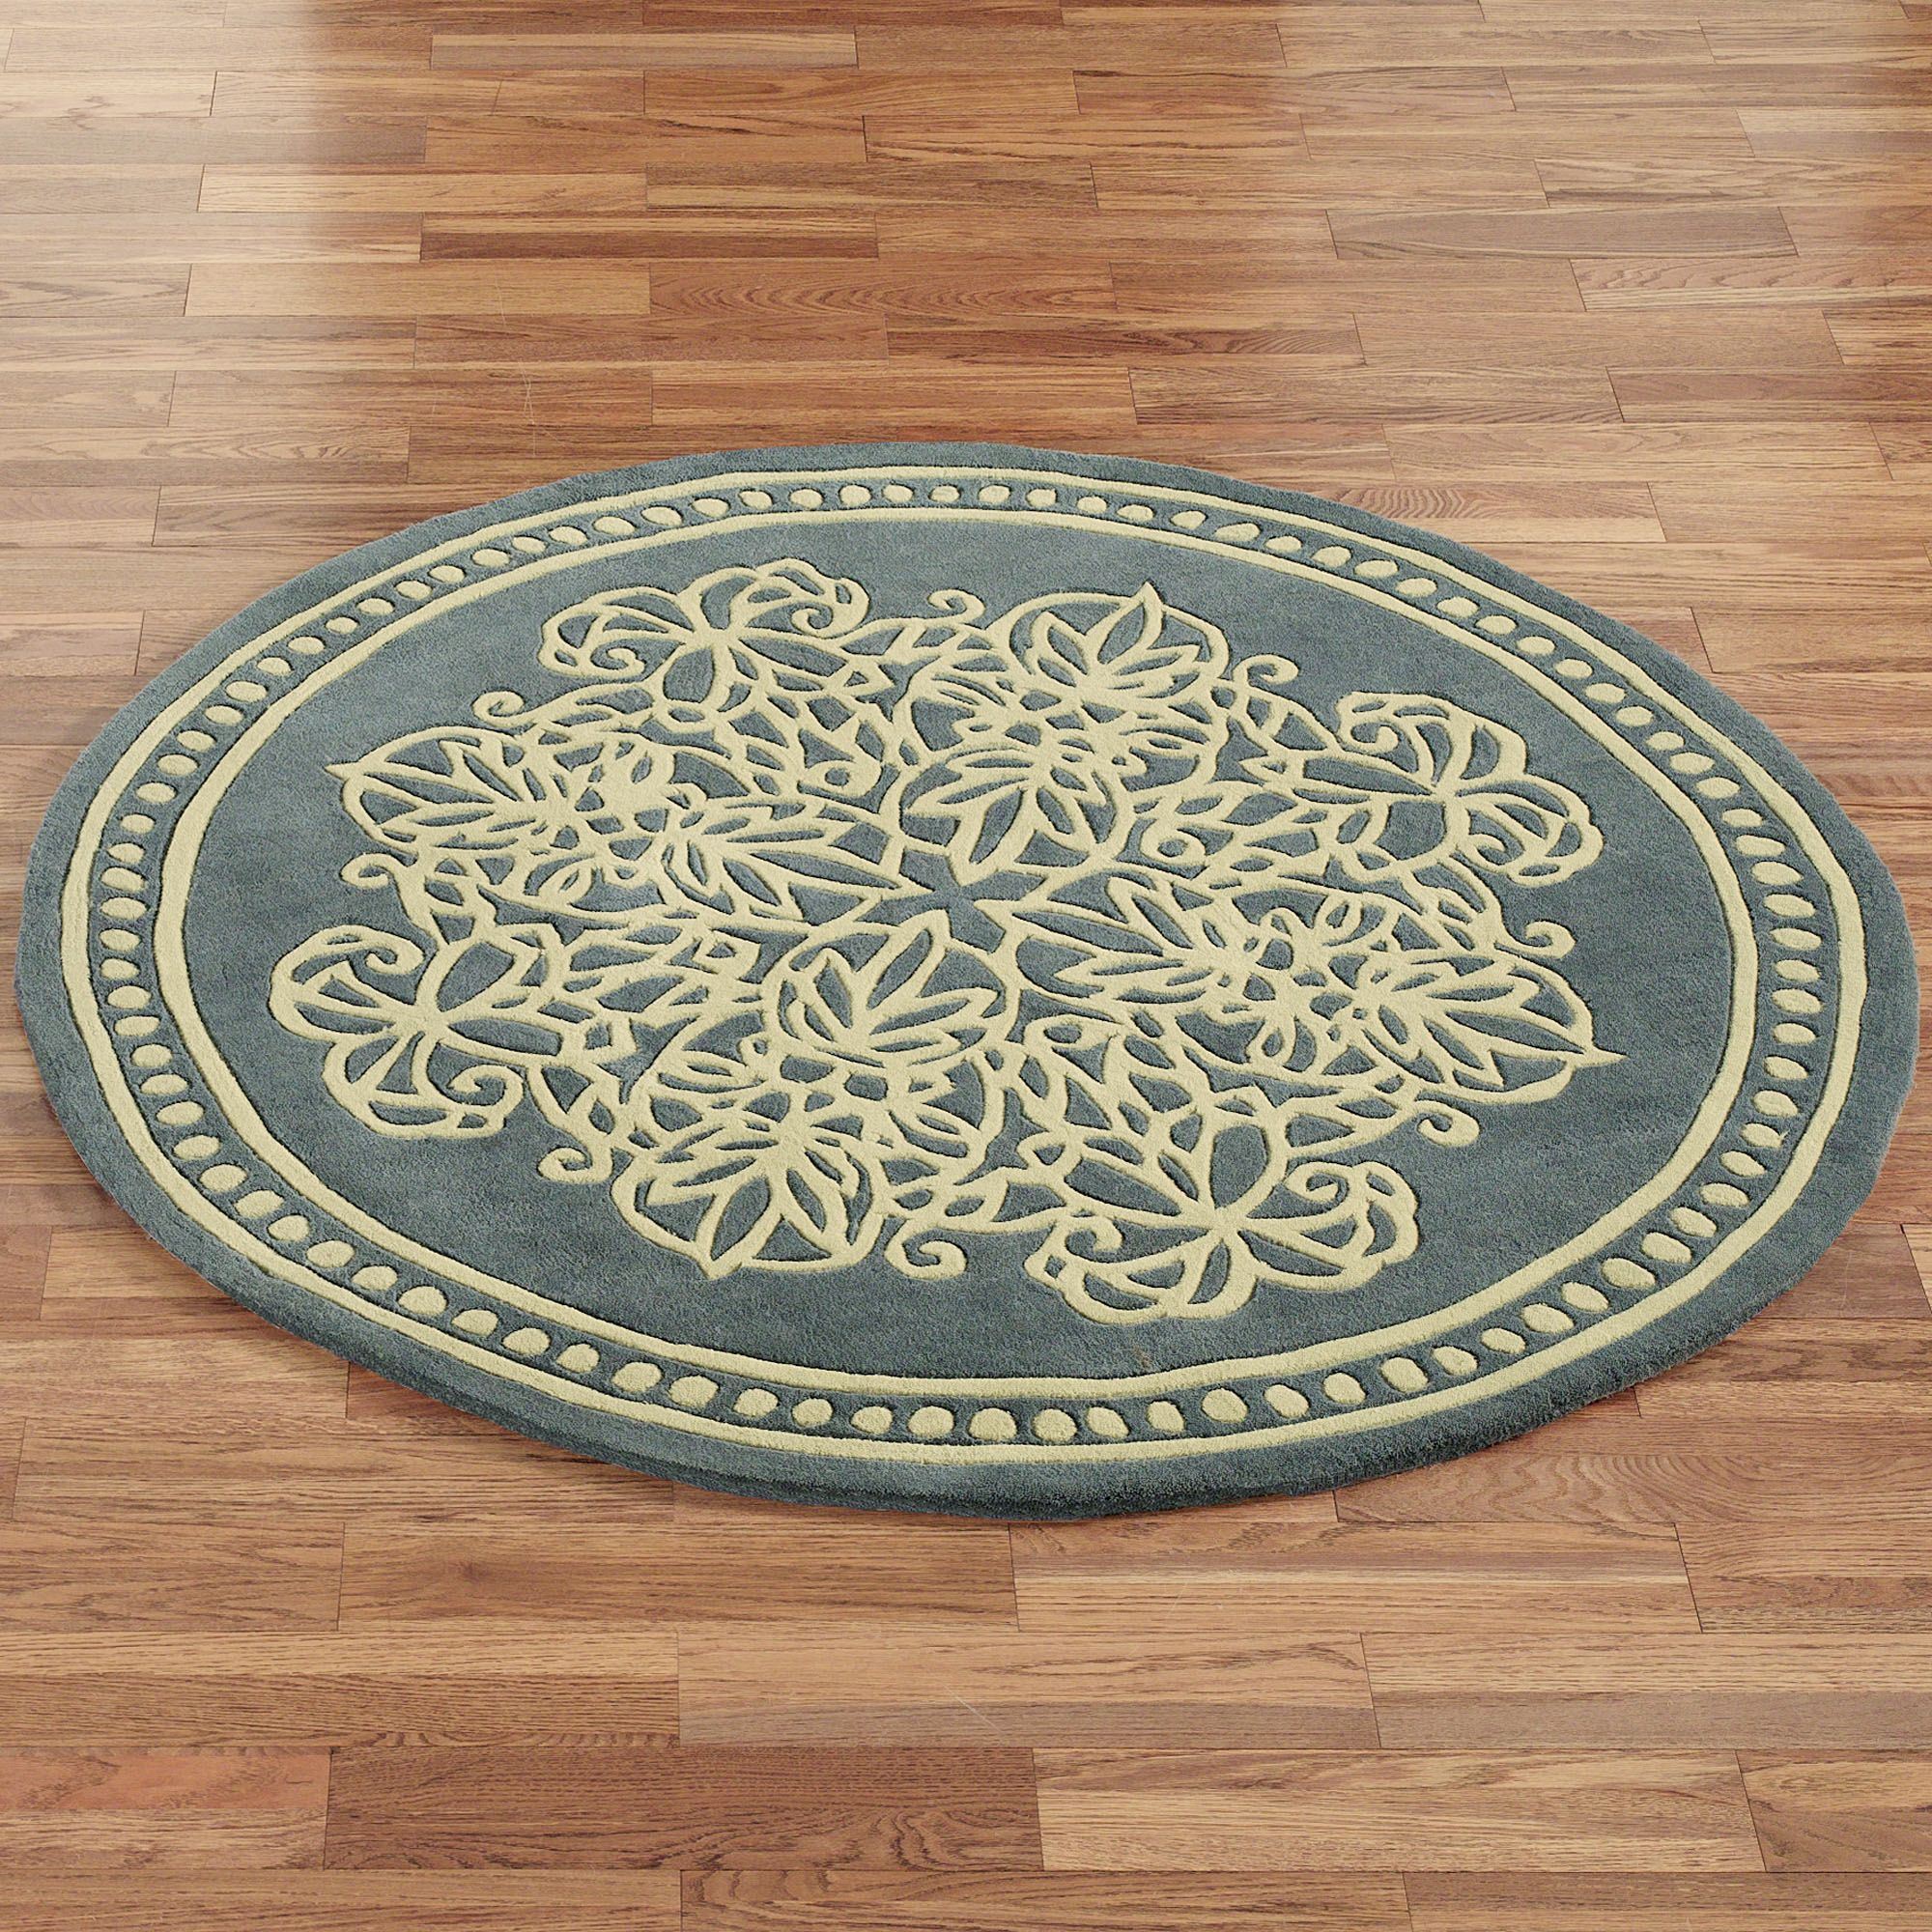 Round Area Rugs To Embellish Your Interior